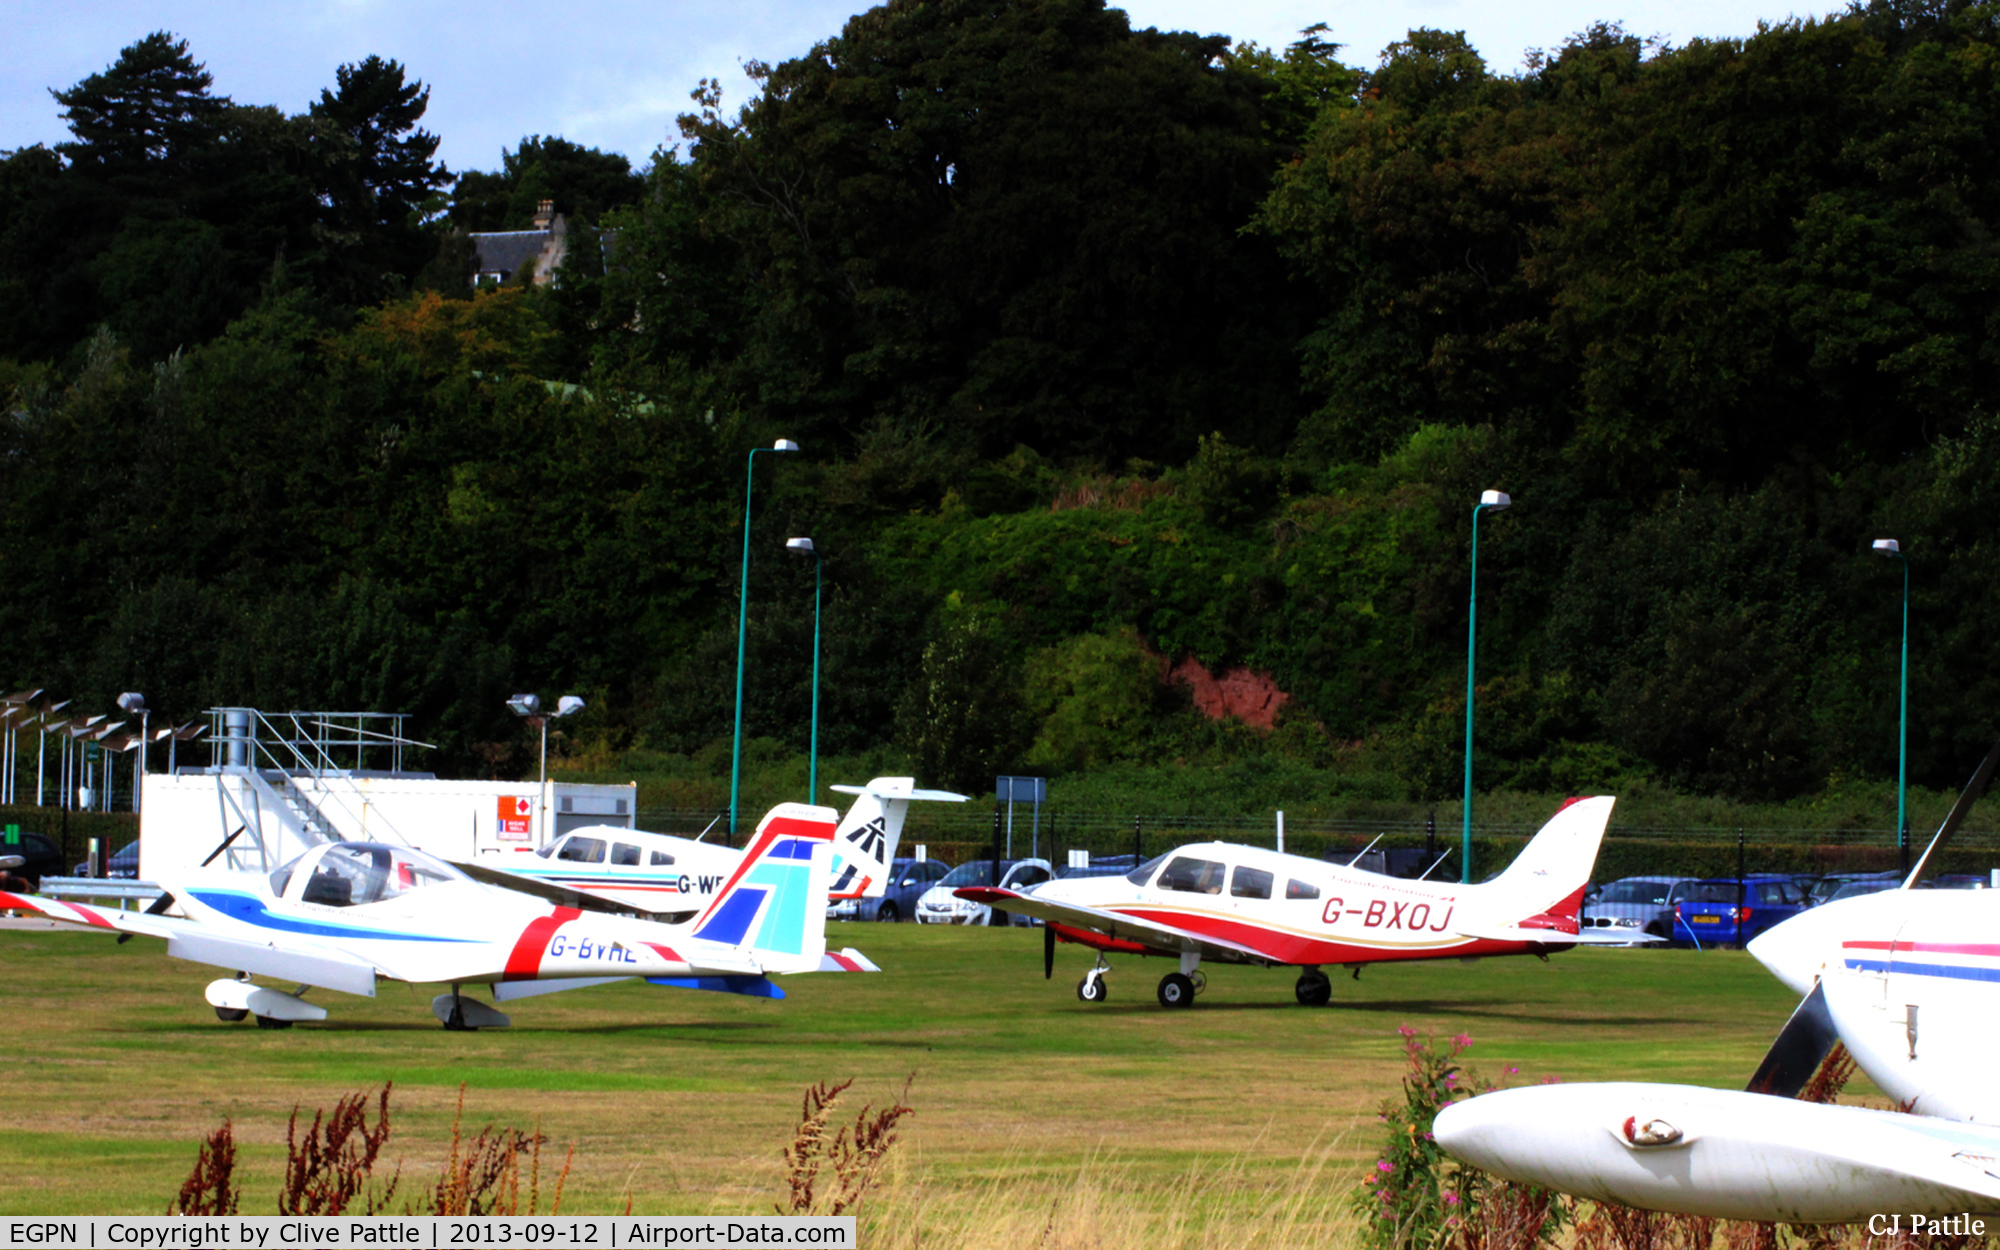 Dundee Airport, Dundee, Scotland United Kingdom (EGPN) - The GA parking area, mostly used by Tayside Aviation aircraft.